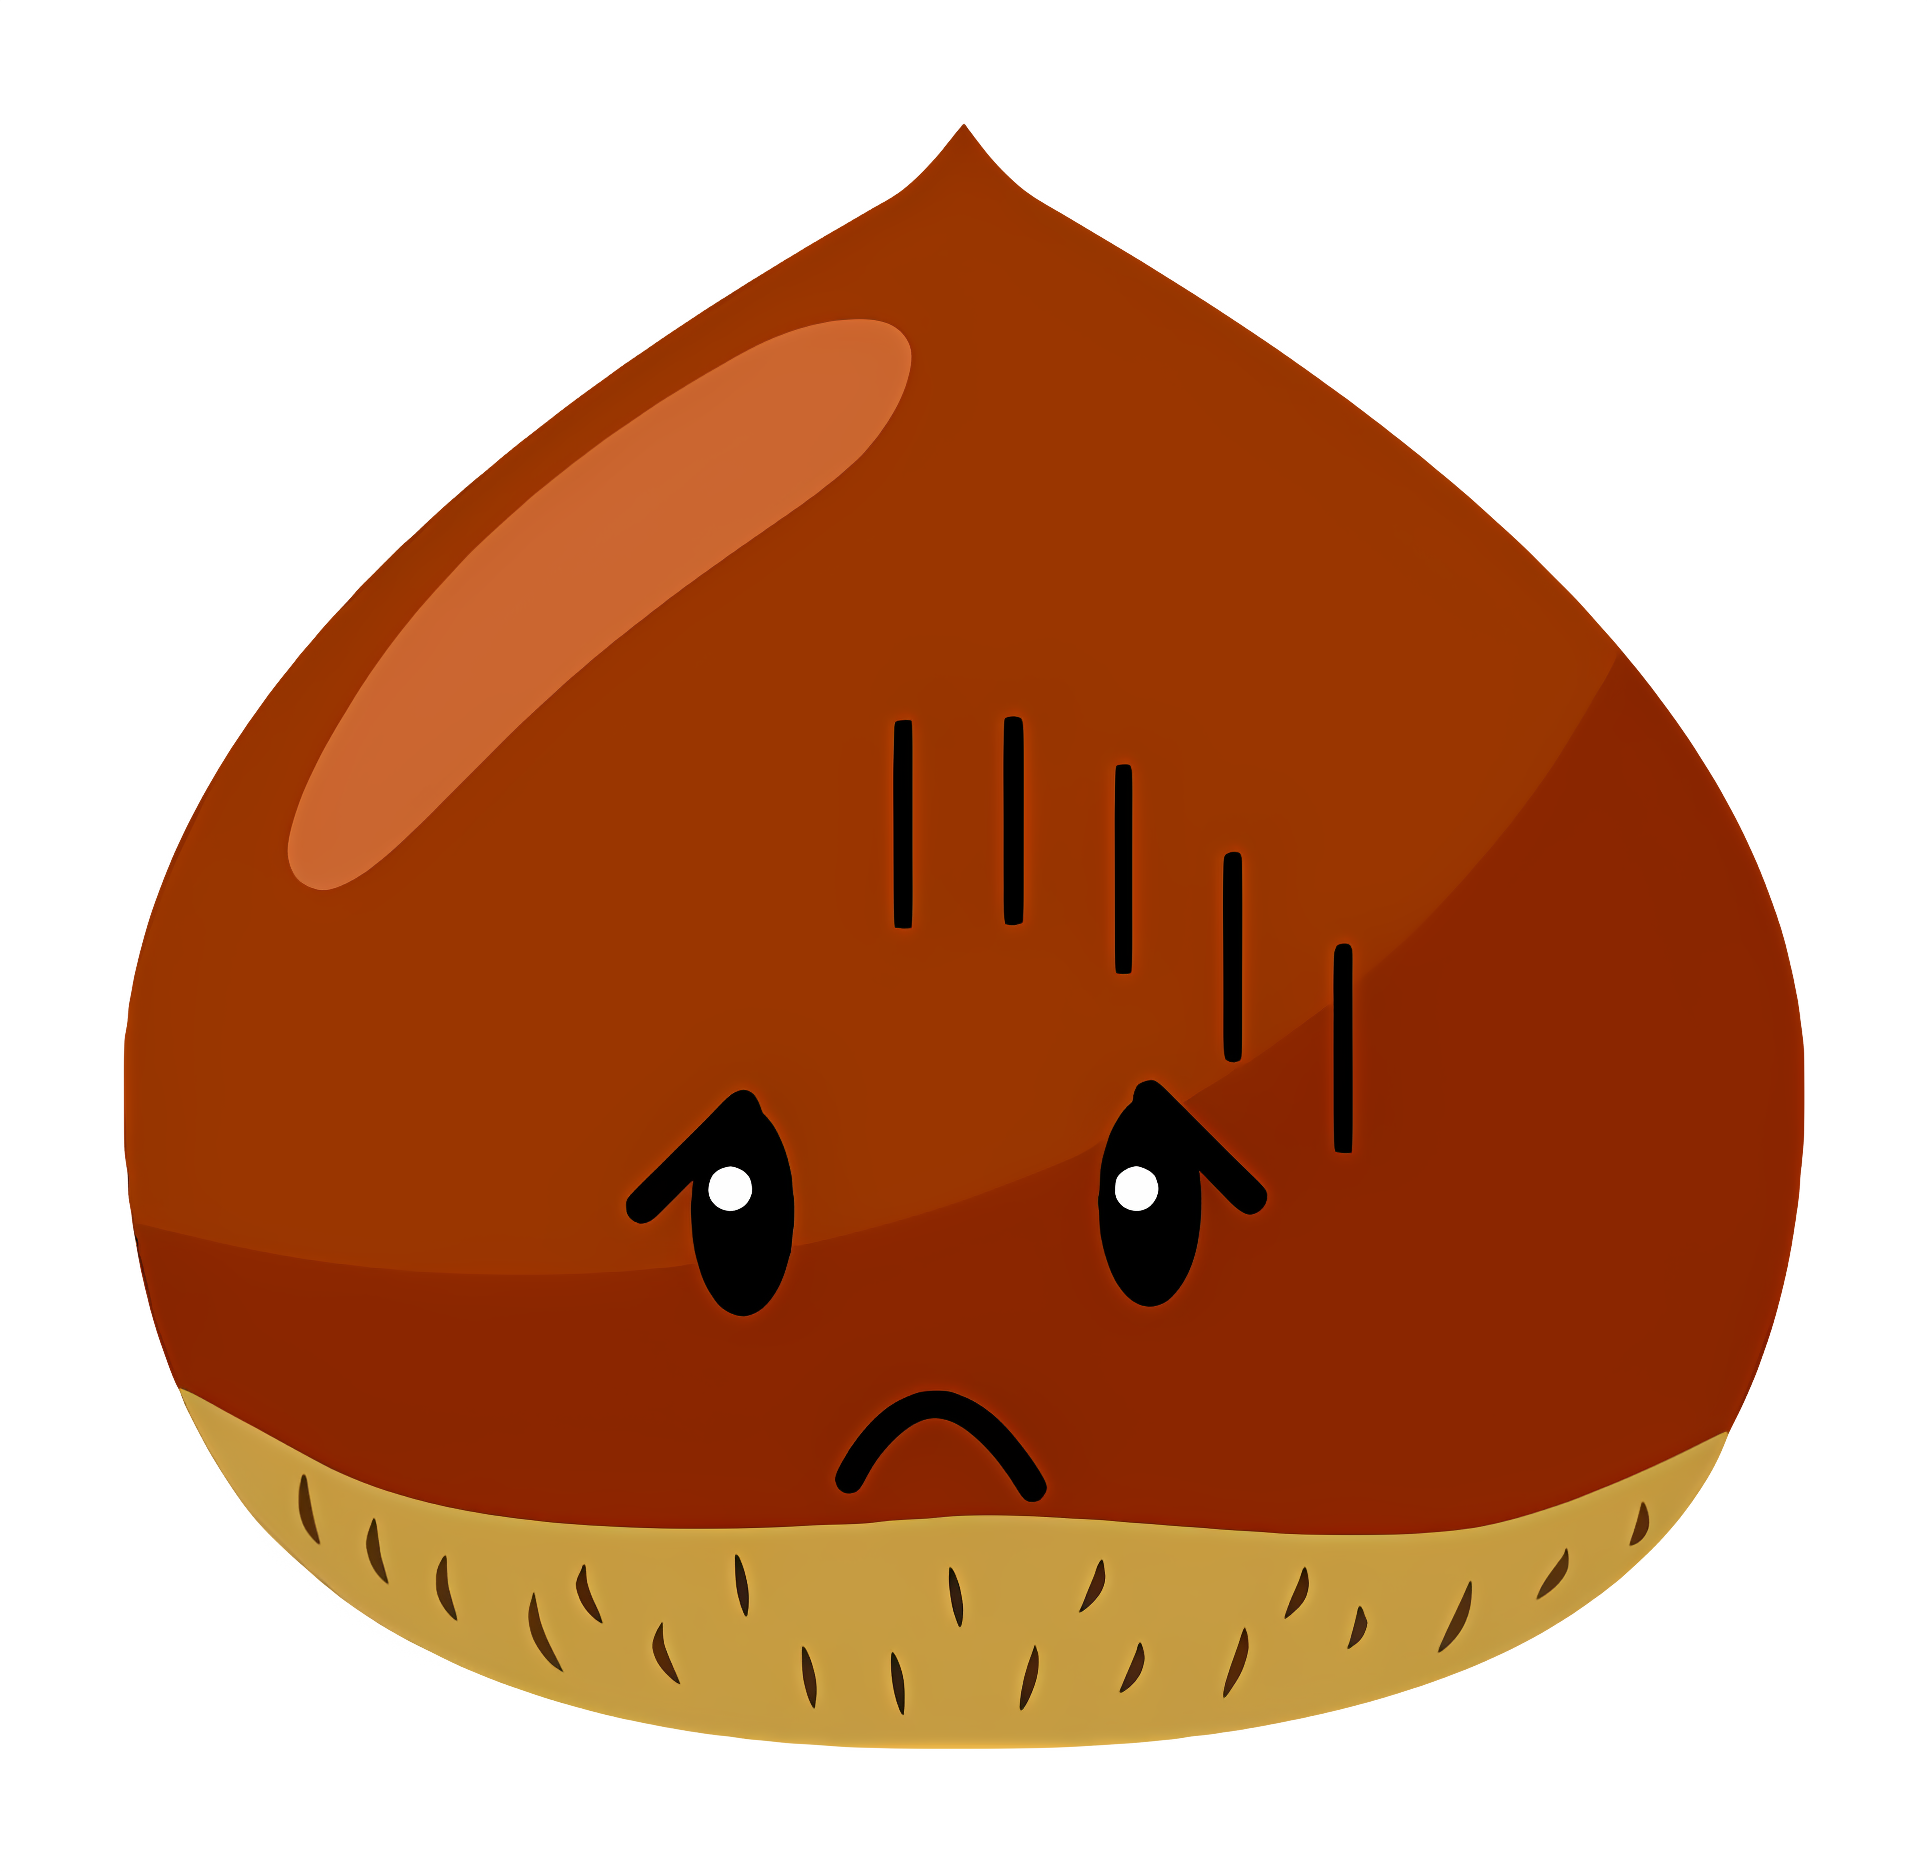 Sad acorn with hollow center on black background Clipart